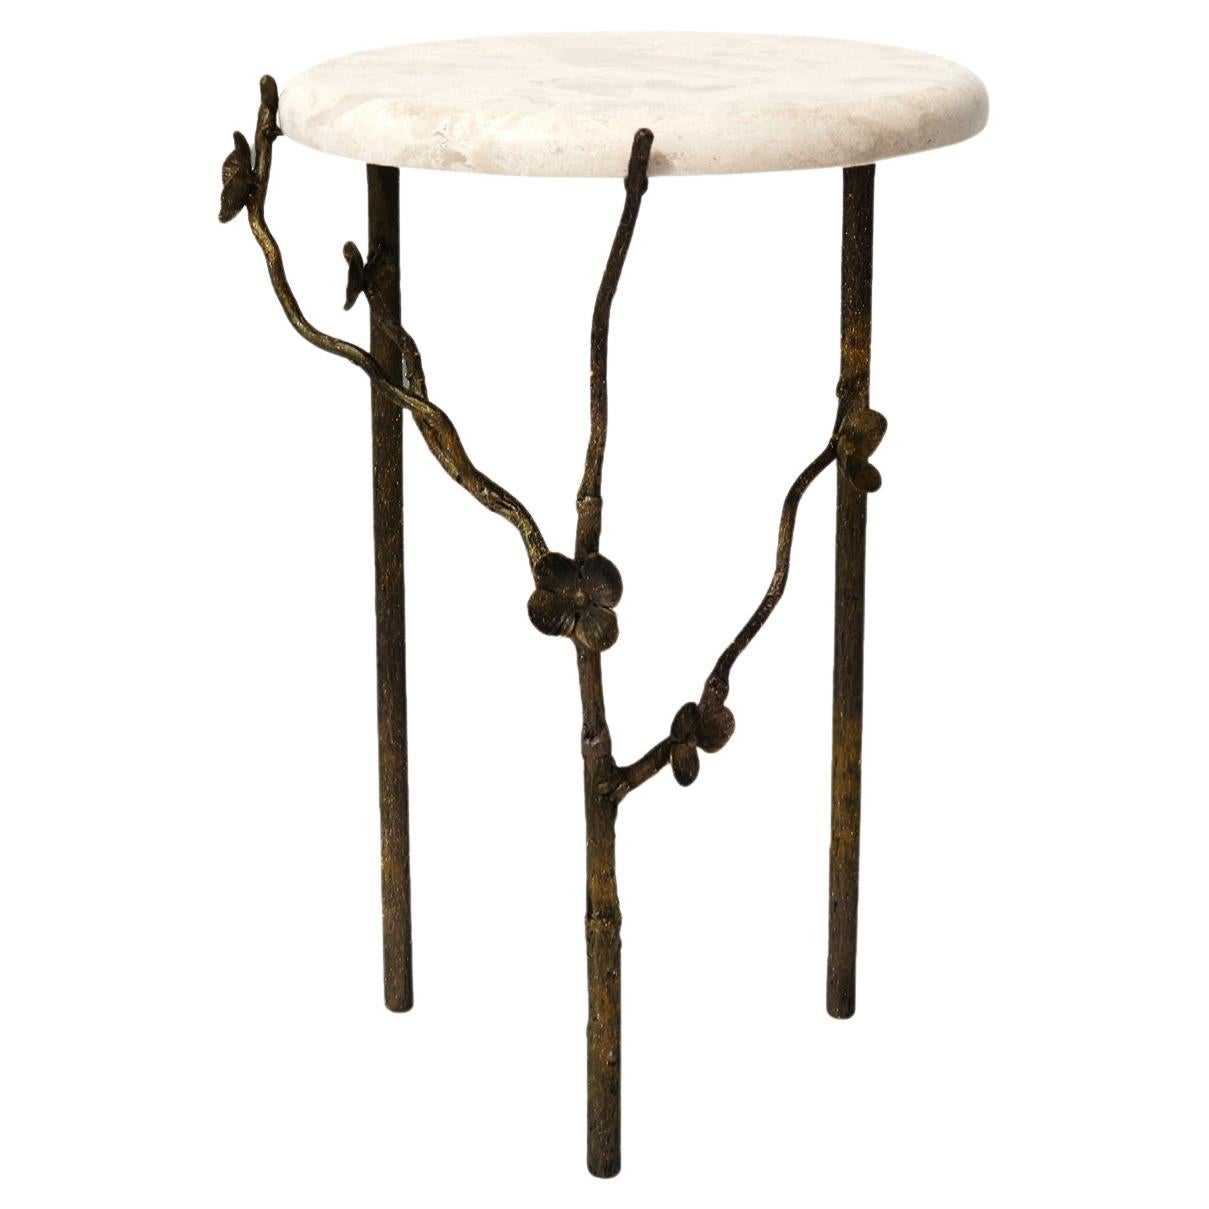 Modern Cherry Blossom Accent Table in Gold Rubbed Black